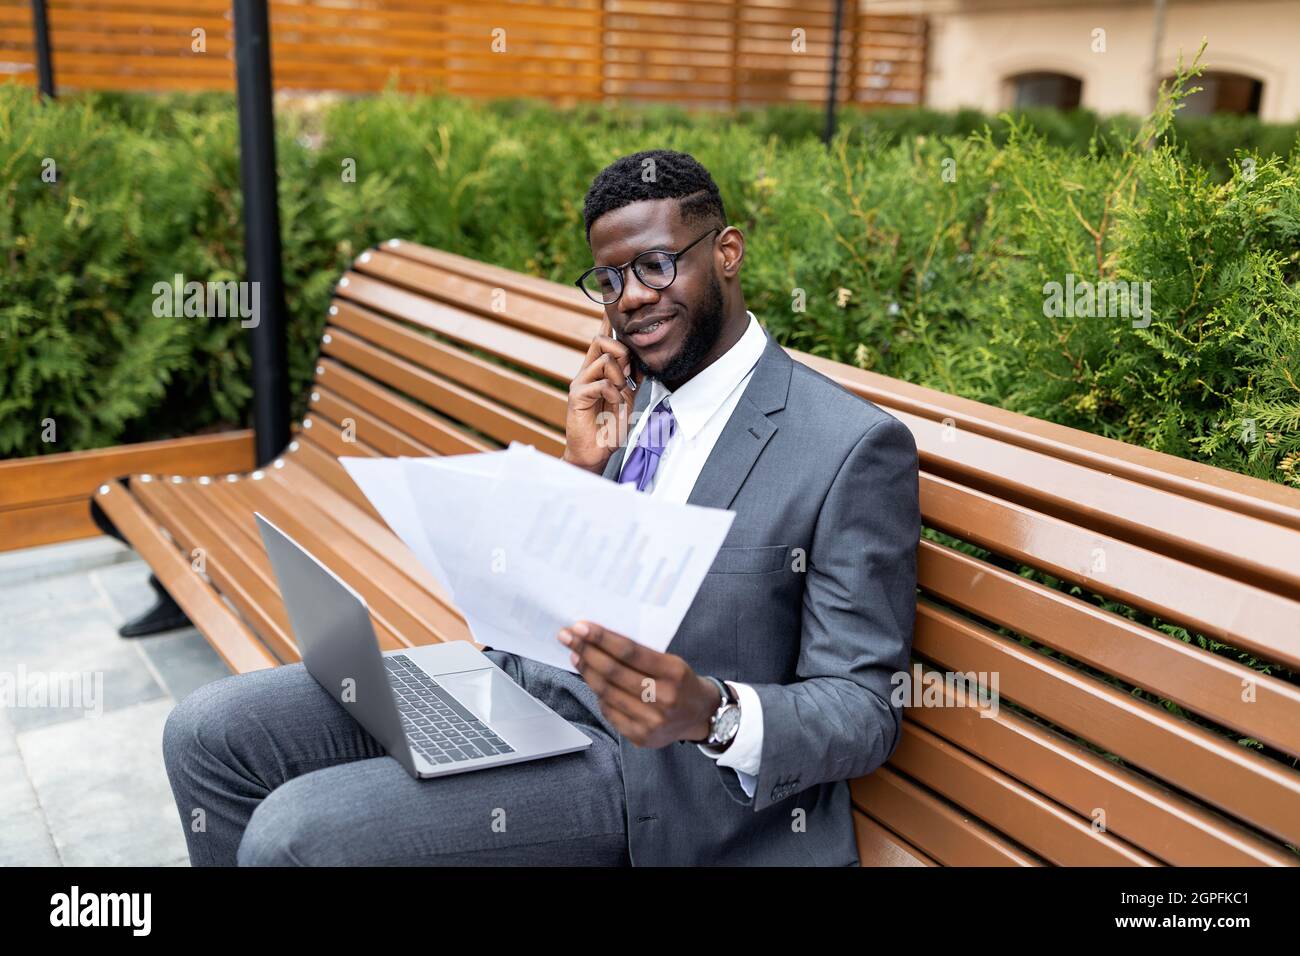 Busy lifestyle. Young african american businessman talking on cellphone, looking at documents, sitting on bench outdoors Stock Photo